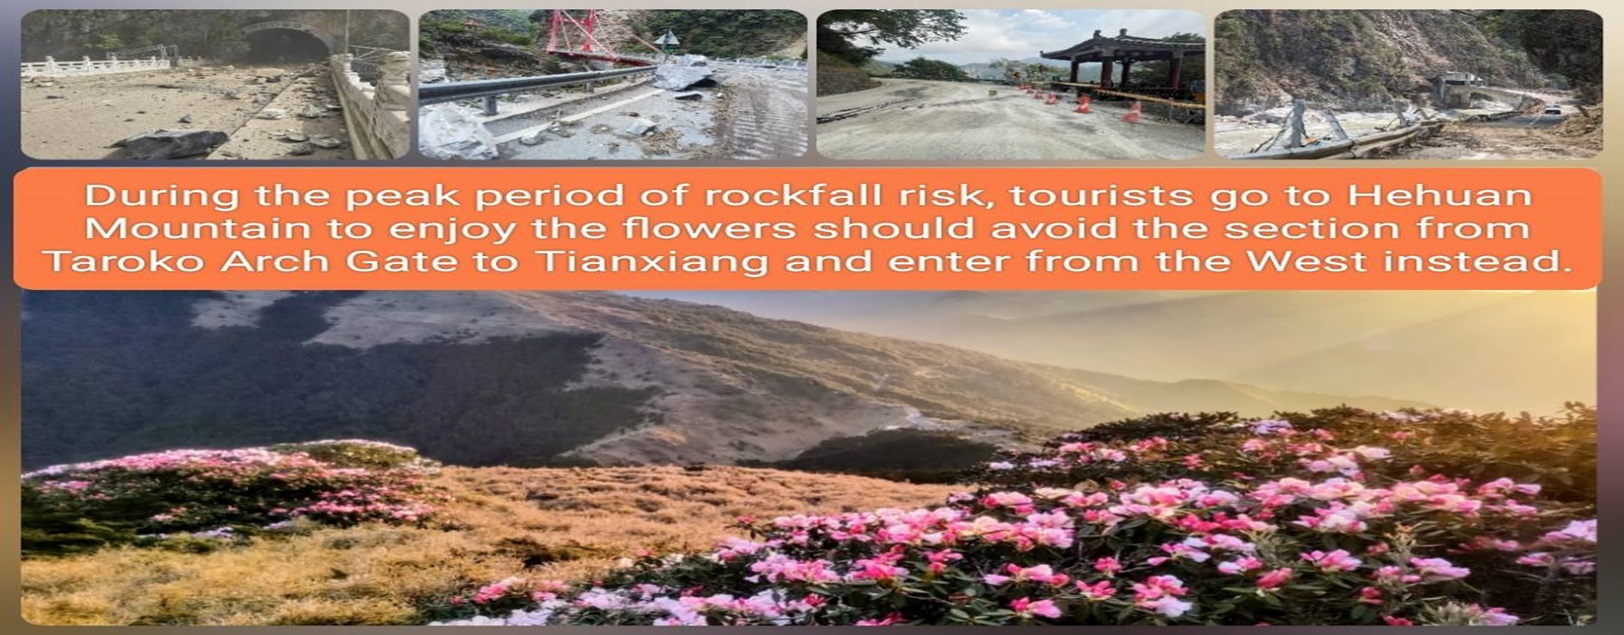 During the peak period of rockfall risk, tourists go to Hehuan Mountain to enjoy the flowers should avoid the section from Taroko Arch Gate to Tianxiang and enter from the West instead.